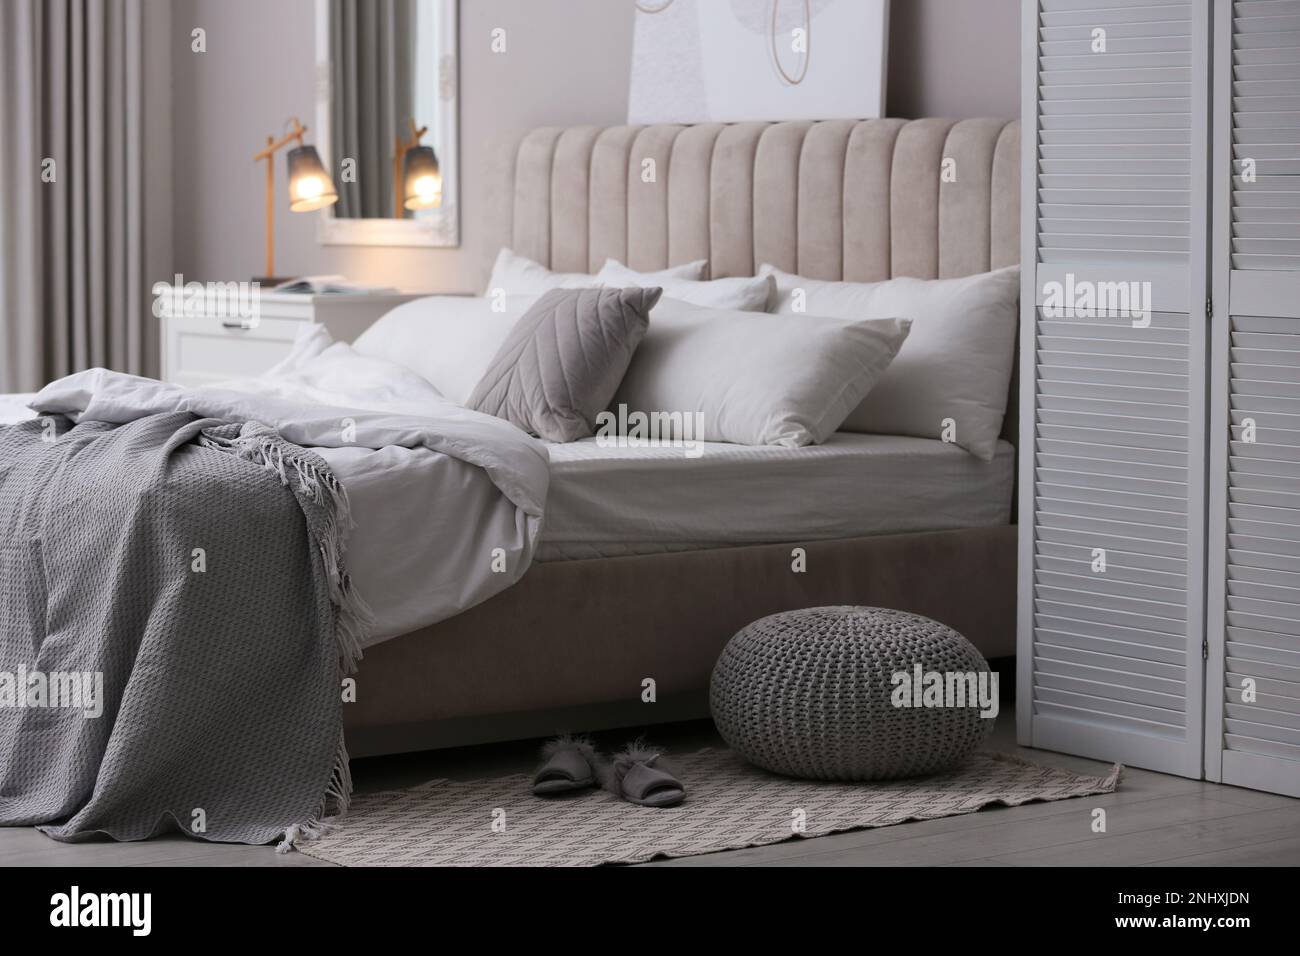 https://c8.alamy.com/comp/2NHXJDN/stylish-room-interior-with-big-comfortable-bed-2NHXJDN.jpg